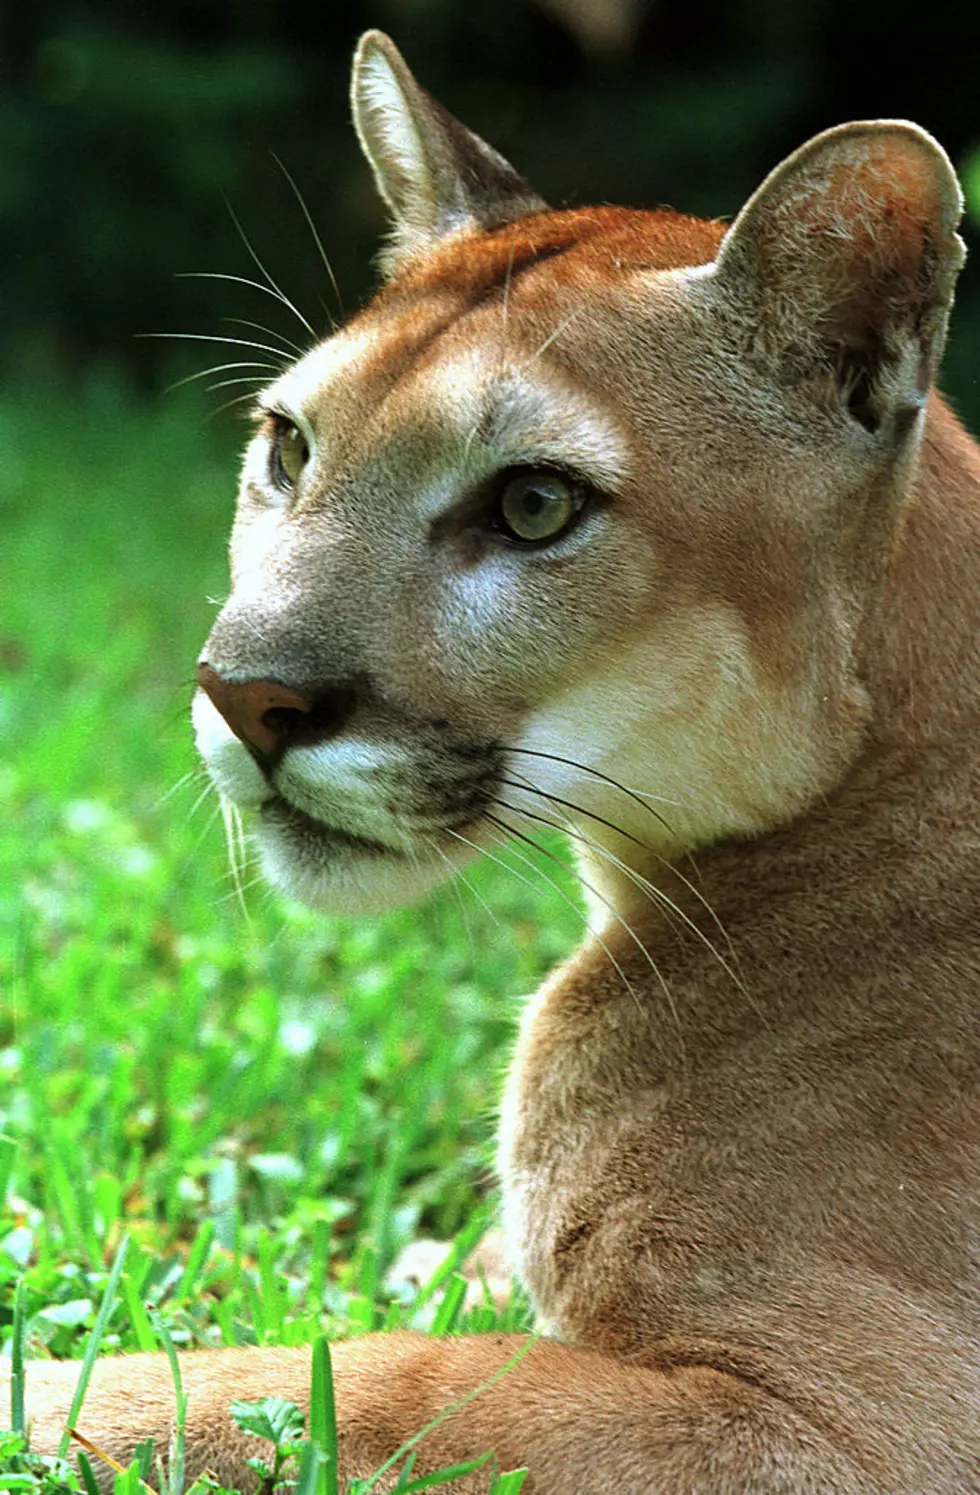 Oklahoma Lawmaker Wants to Legalize Mountain Lion Hunting in the State